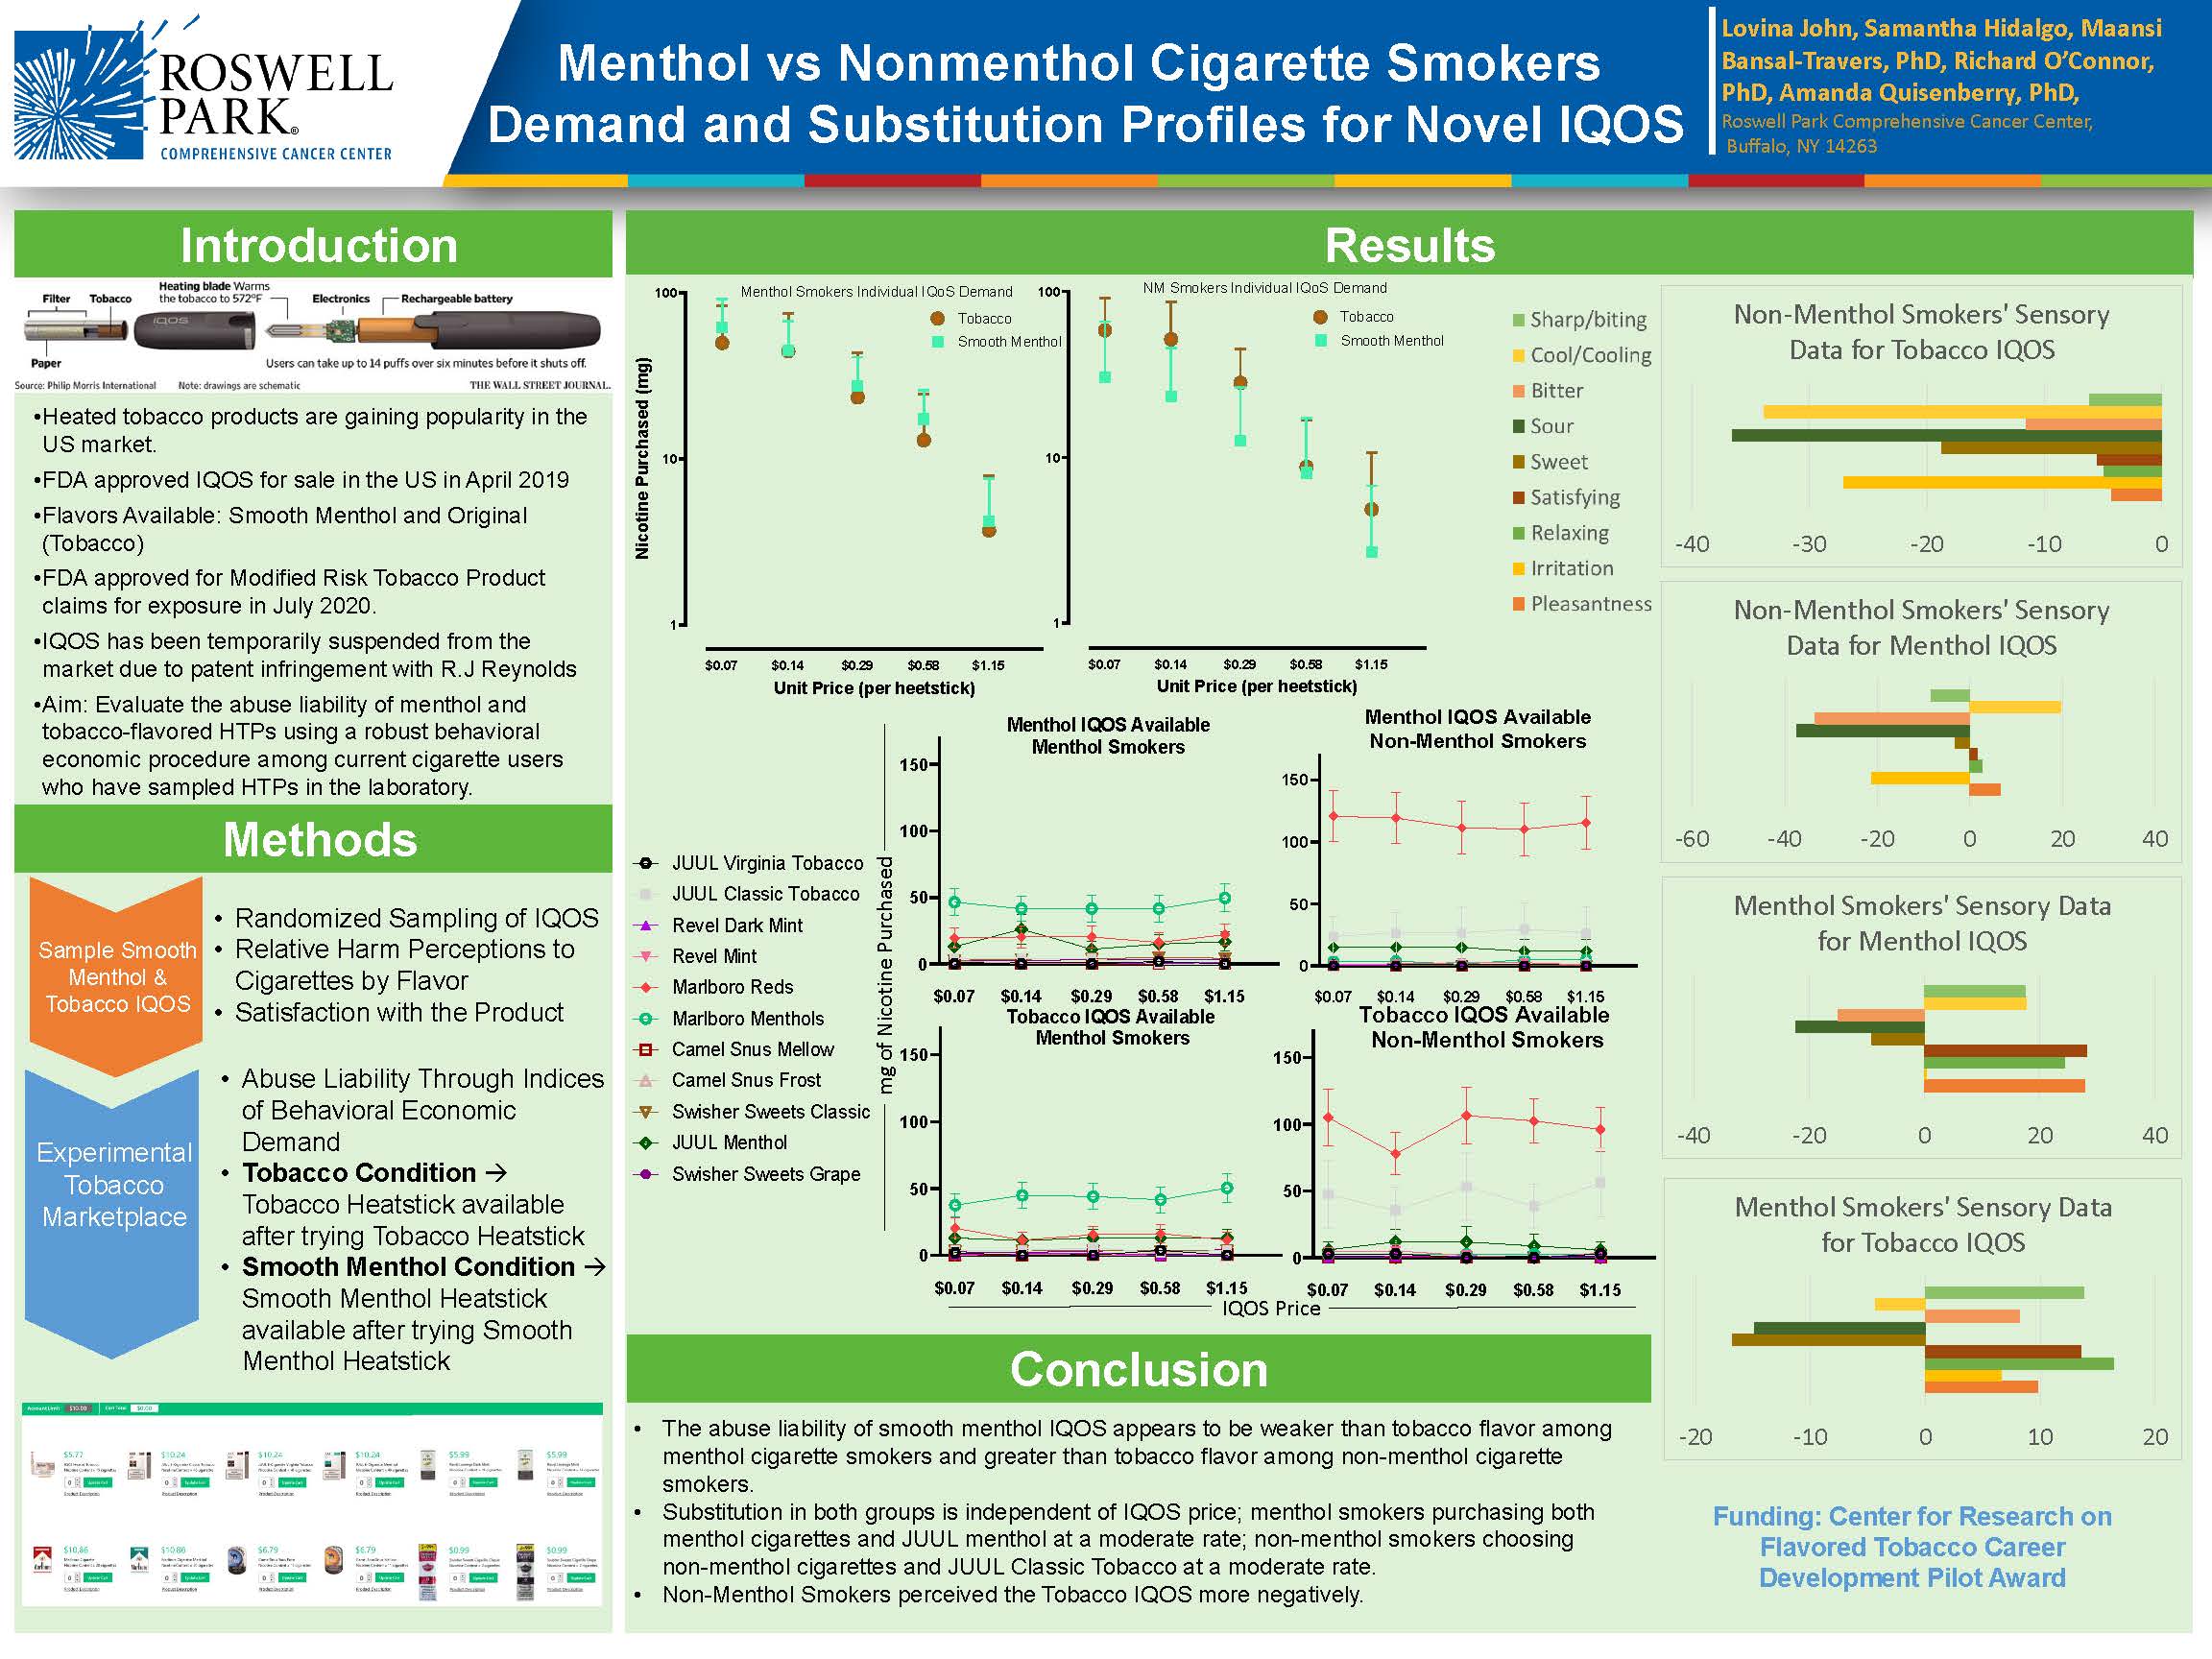 Menthol vs Nonmenthol Cigarette Smokers Demand and Substitution Profiles for Novel IQOS